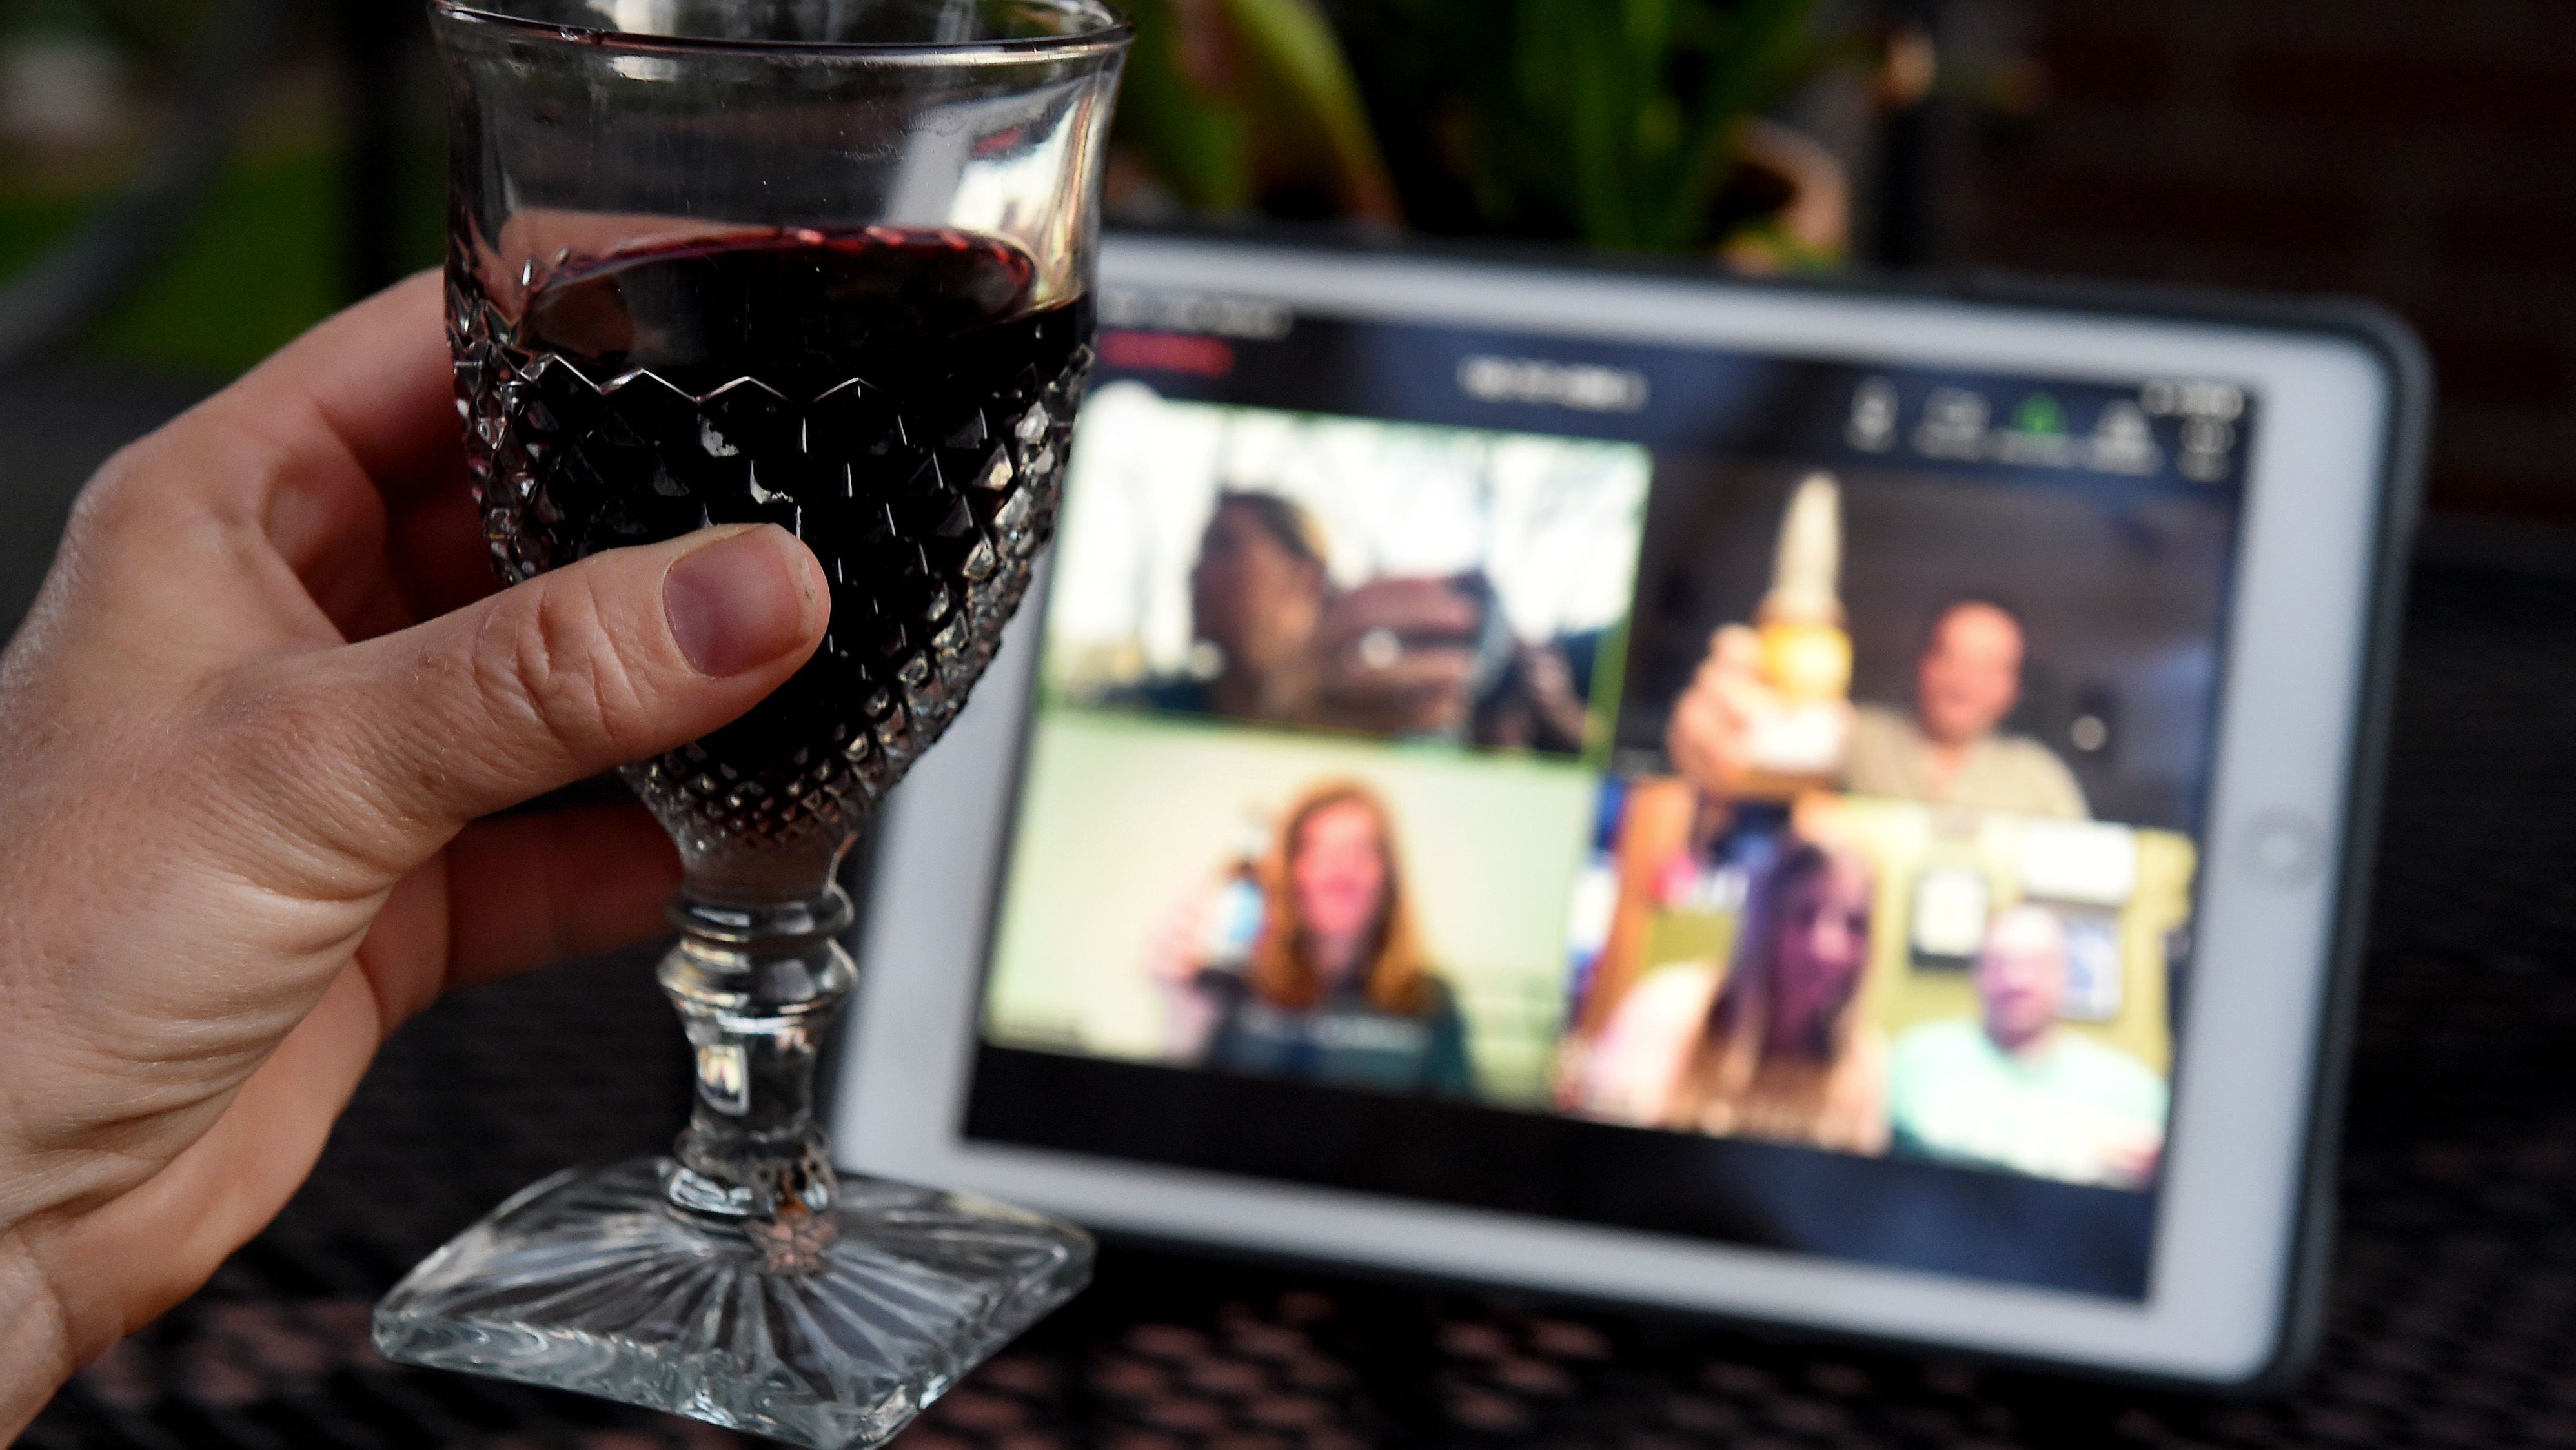 A woman lifts her glass and cheers with friends during a virtual happy hour amid the coronavirus crisis.